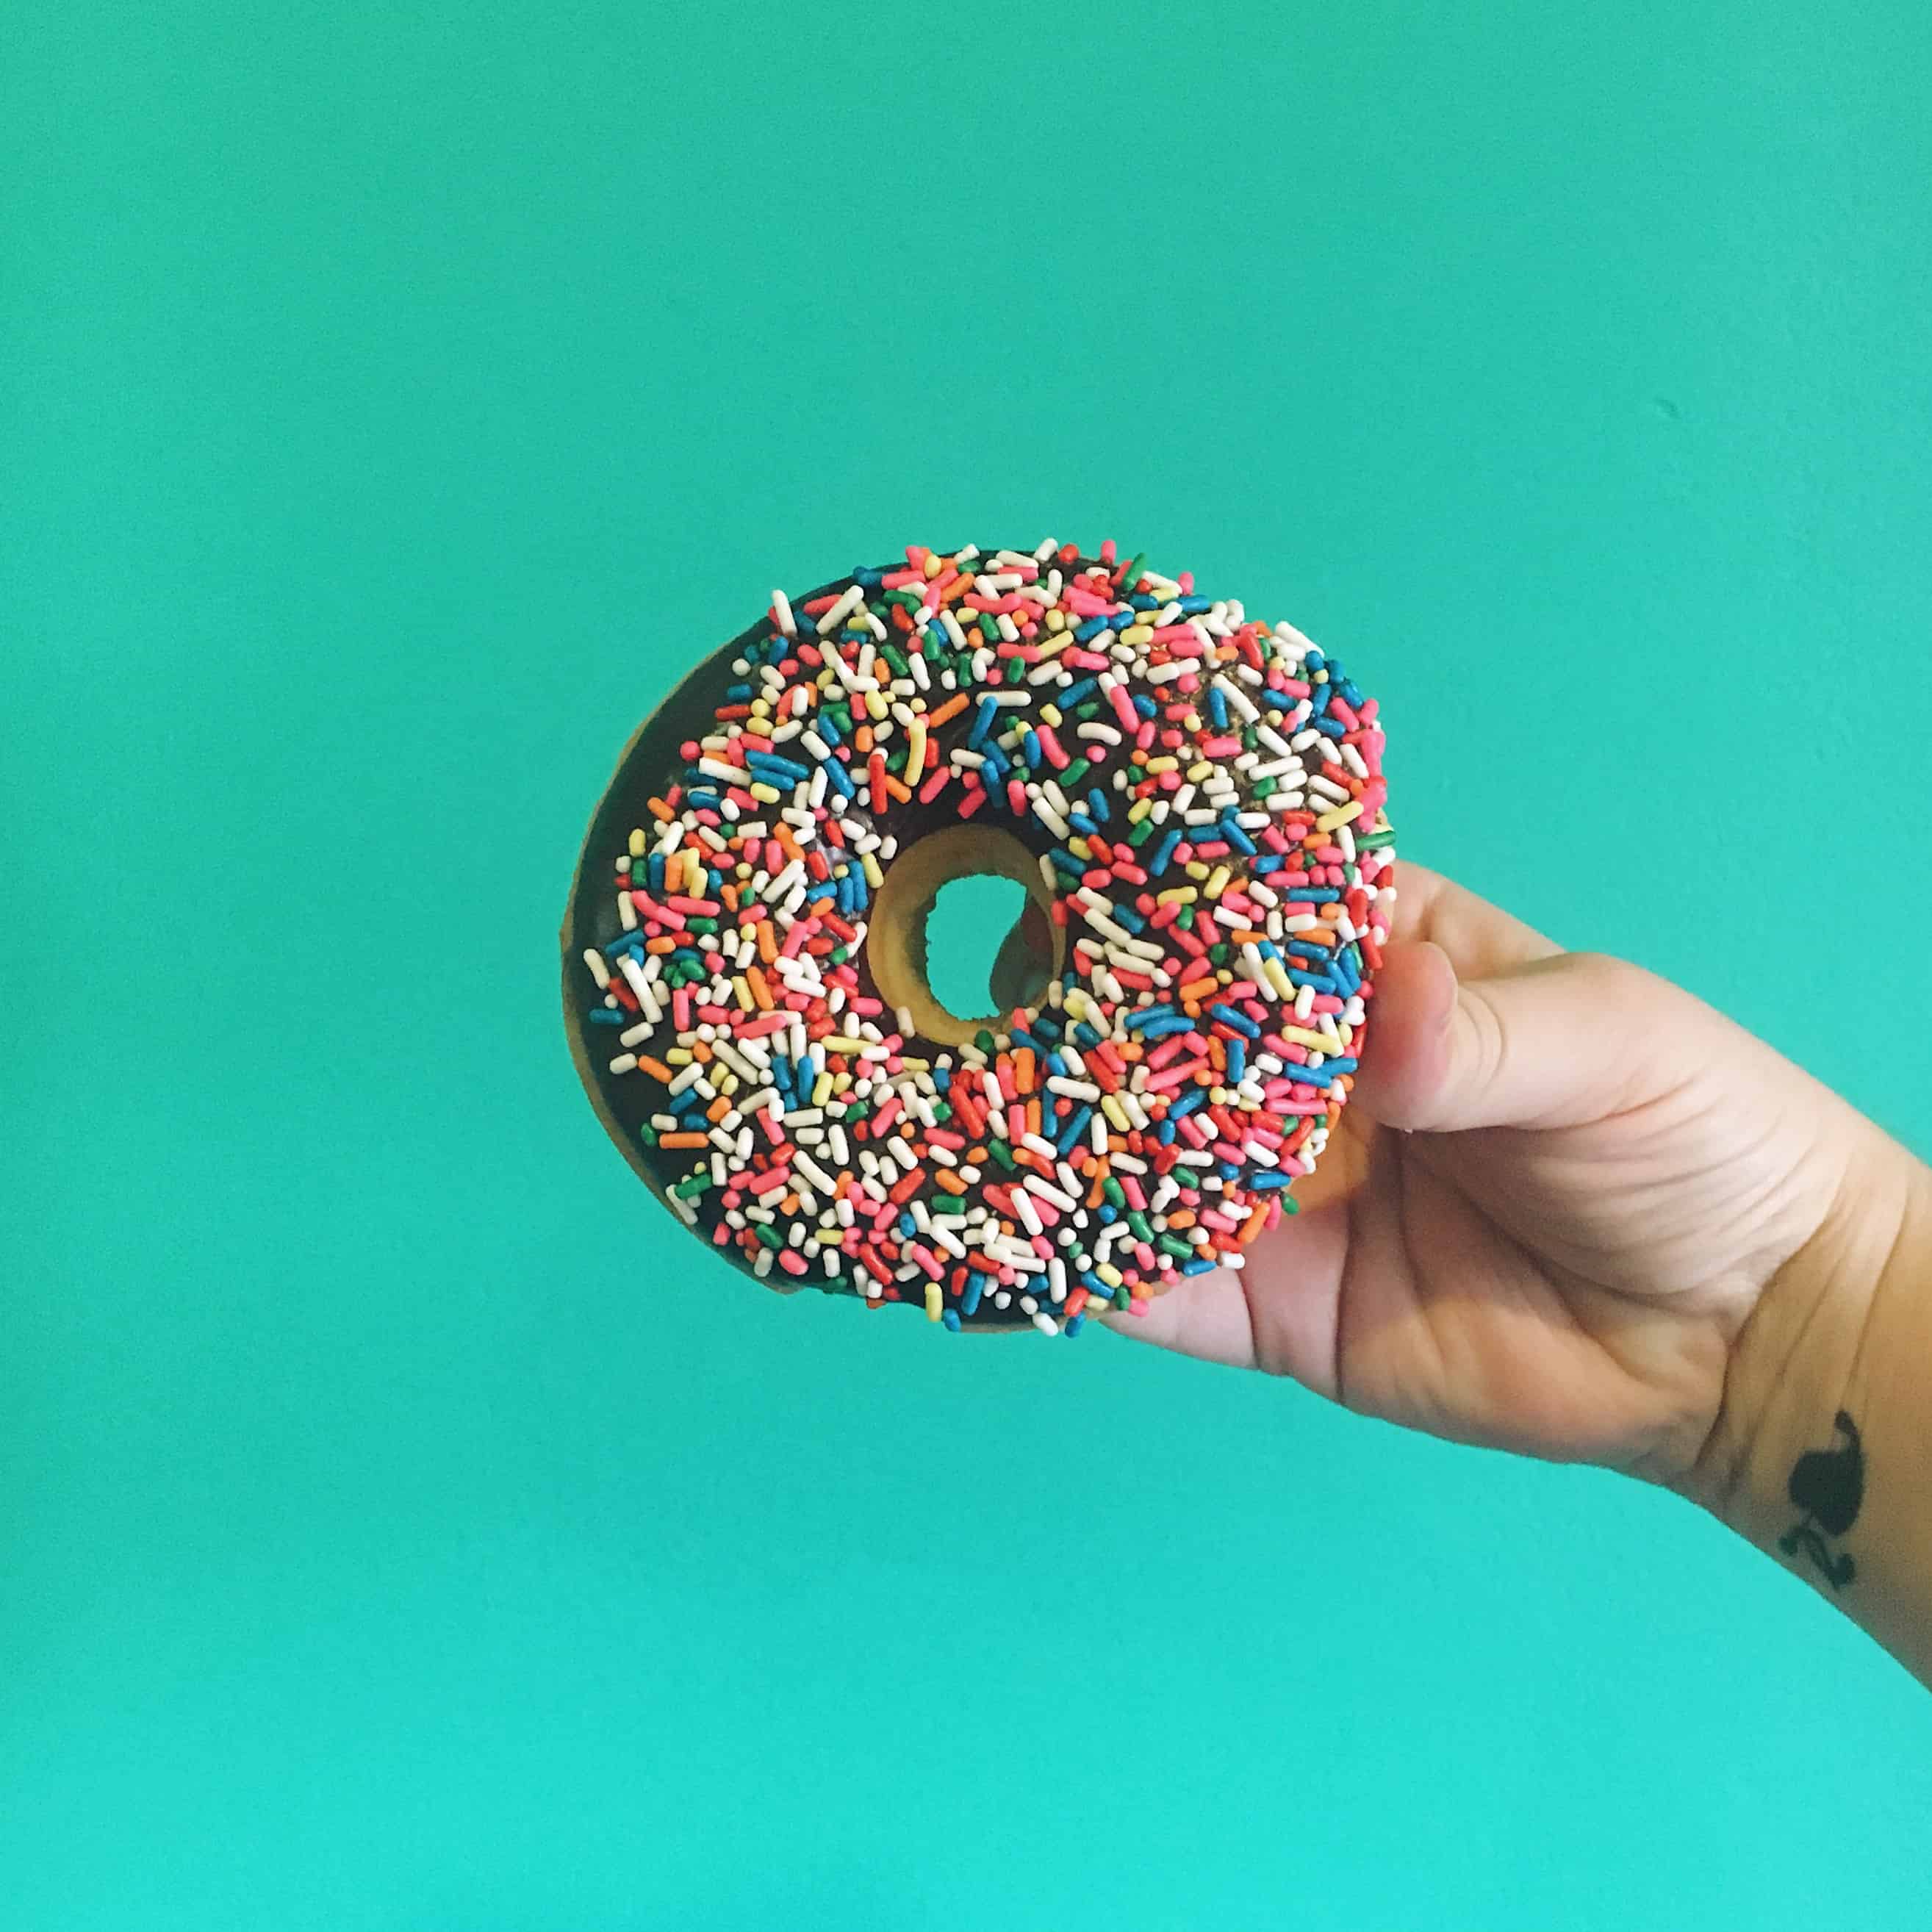 A sprinkle-covered donut against a teal background.